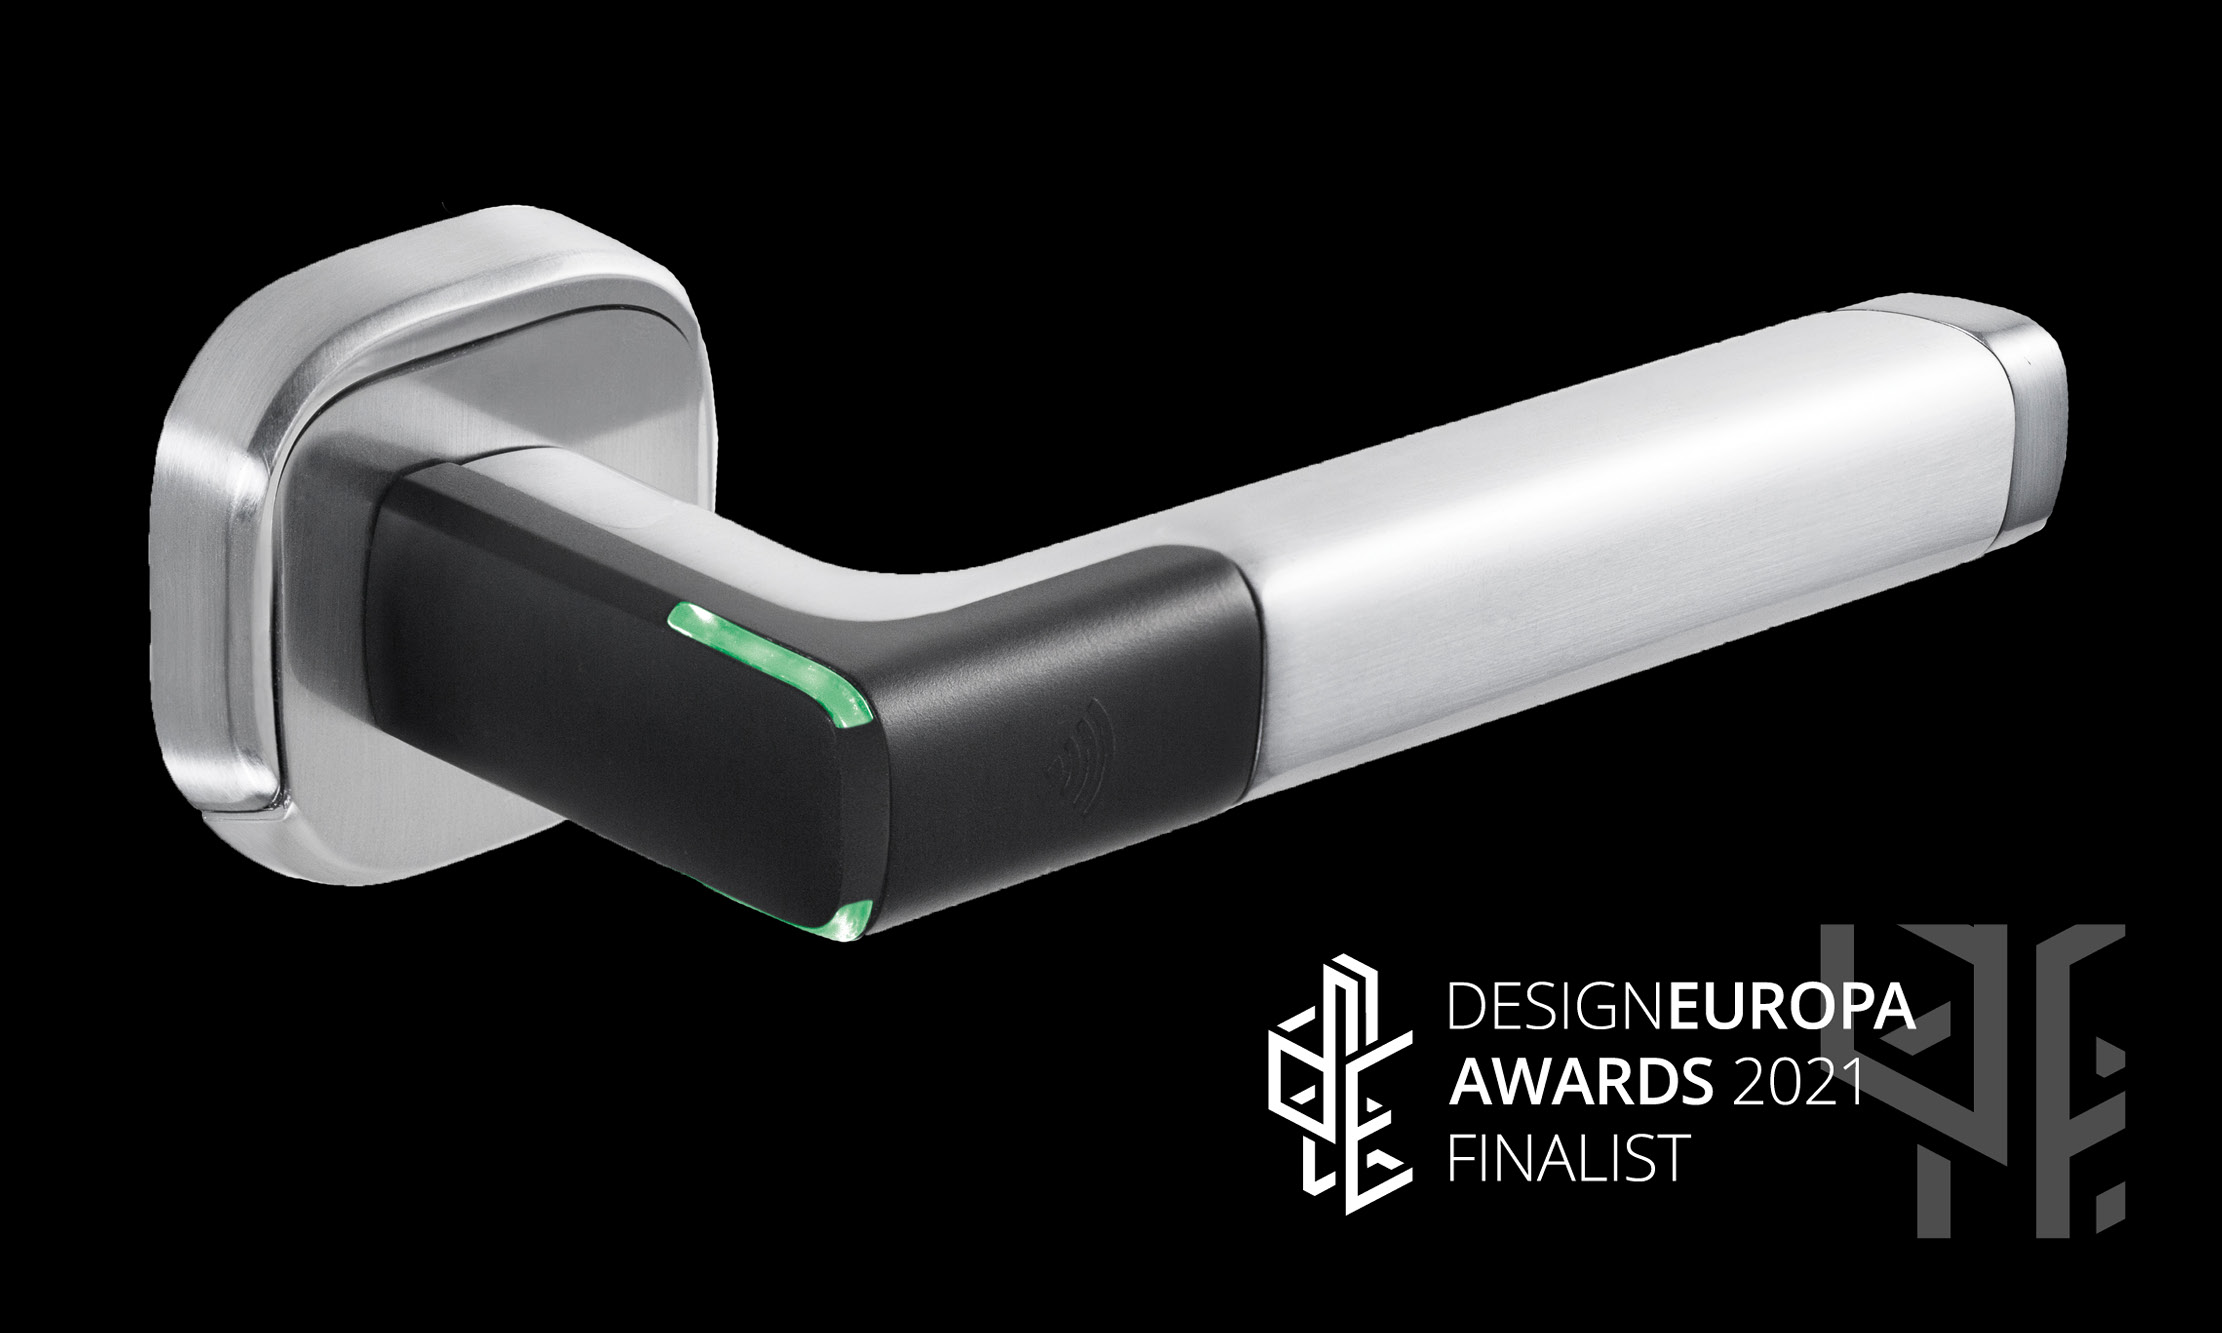 DesignEuropa Awards shortlist highlights the importance of access control product design